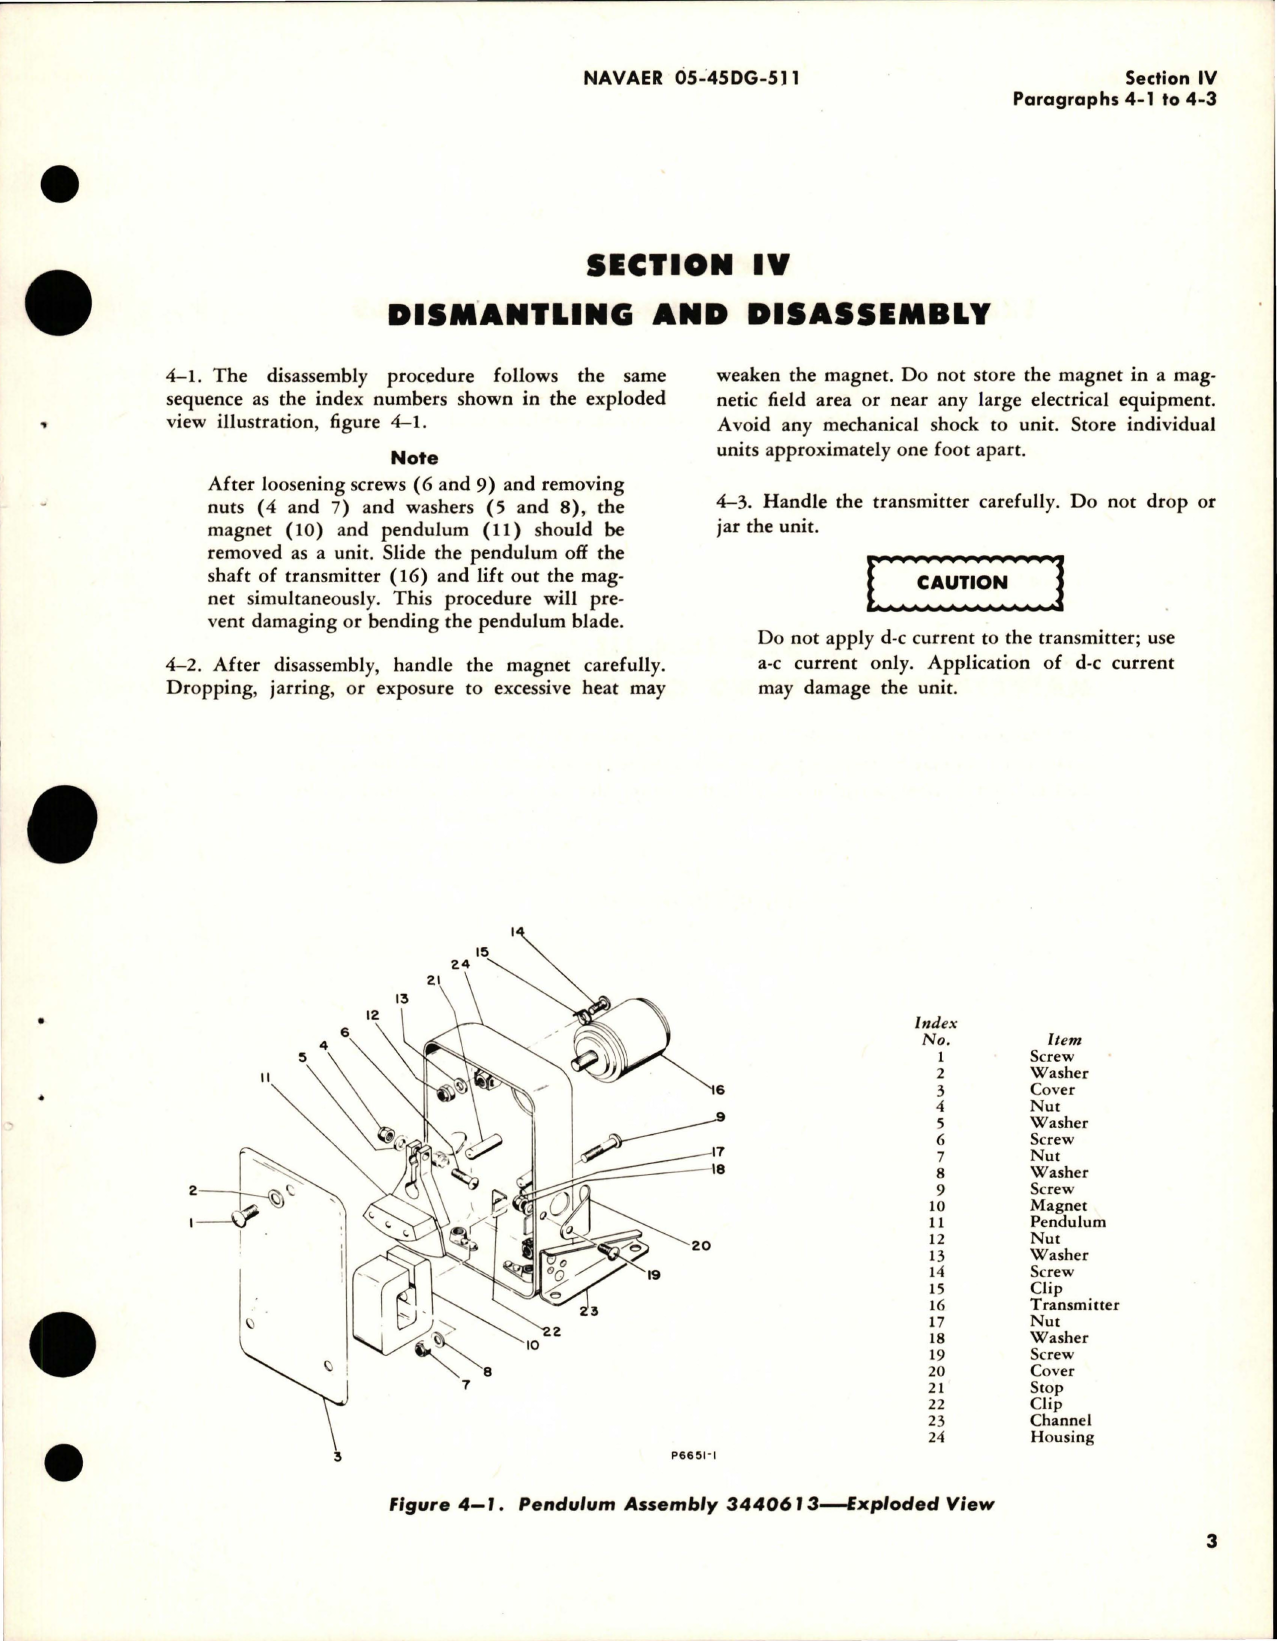 Sample page 7 from AirCorps Library document: Overhaul Instructions for Pendulum Assy - Parts 3440613, 3440613-501, and 3440613-503 for D-1 Auto Control